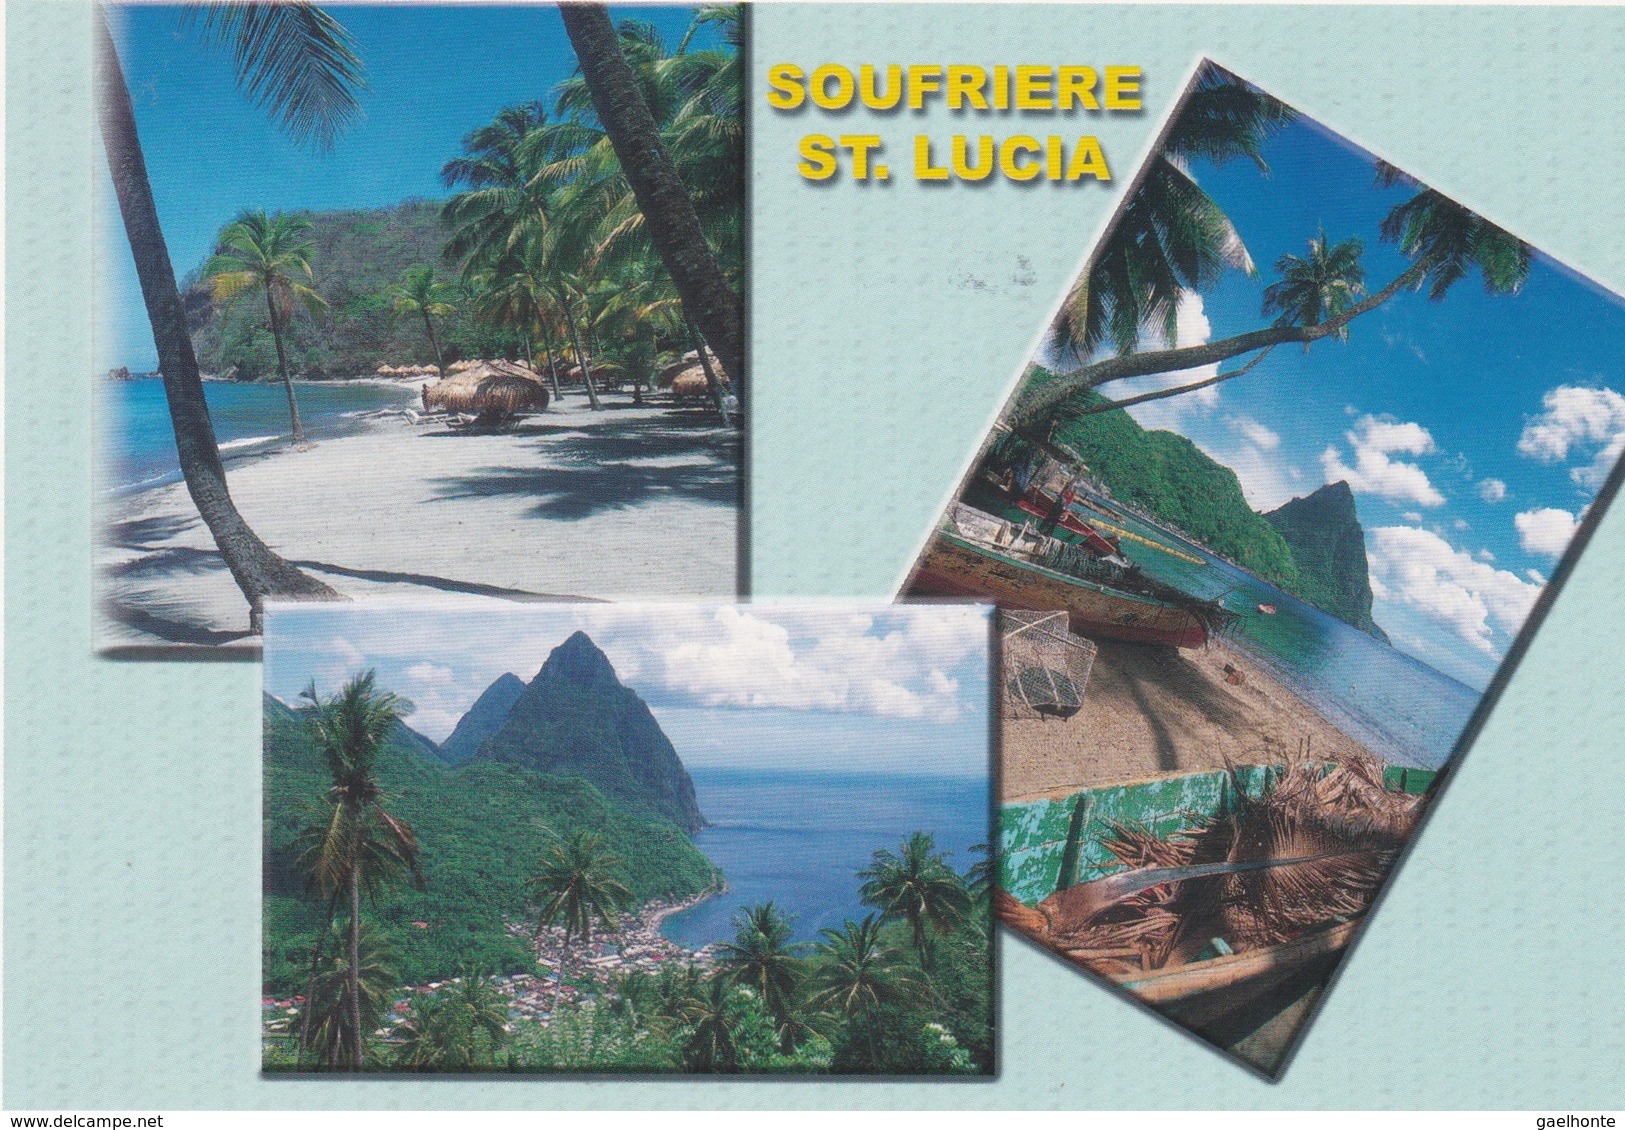 1213 SOUFRIERE - ST LUCIA - SCENERY INVITING YOU TO INTERACT WITH NATURE - GRANDE CARTE - Saint Lucia